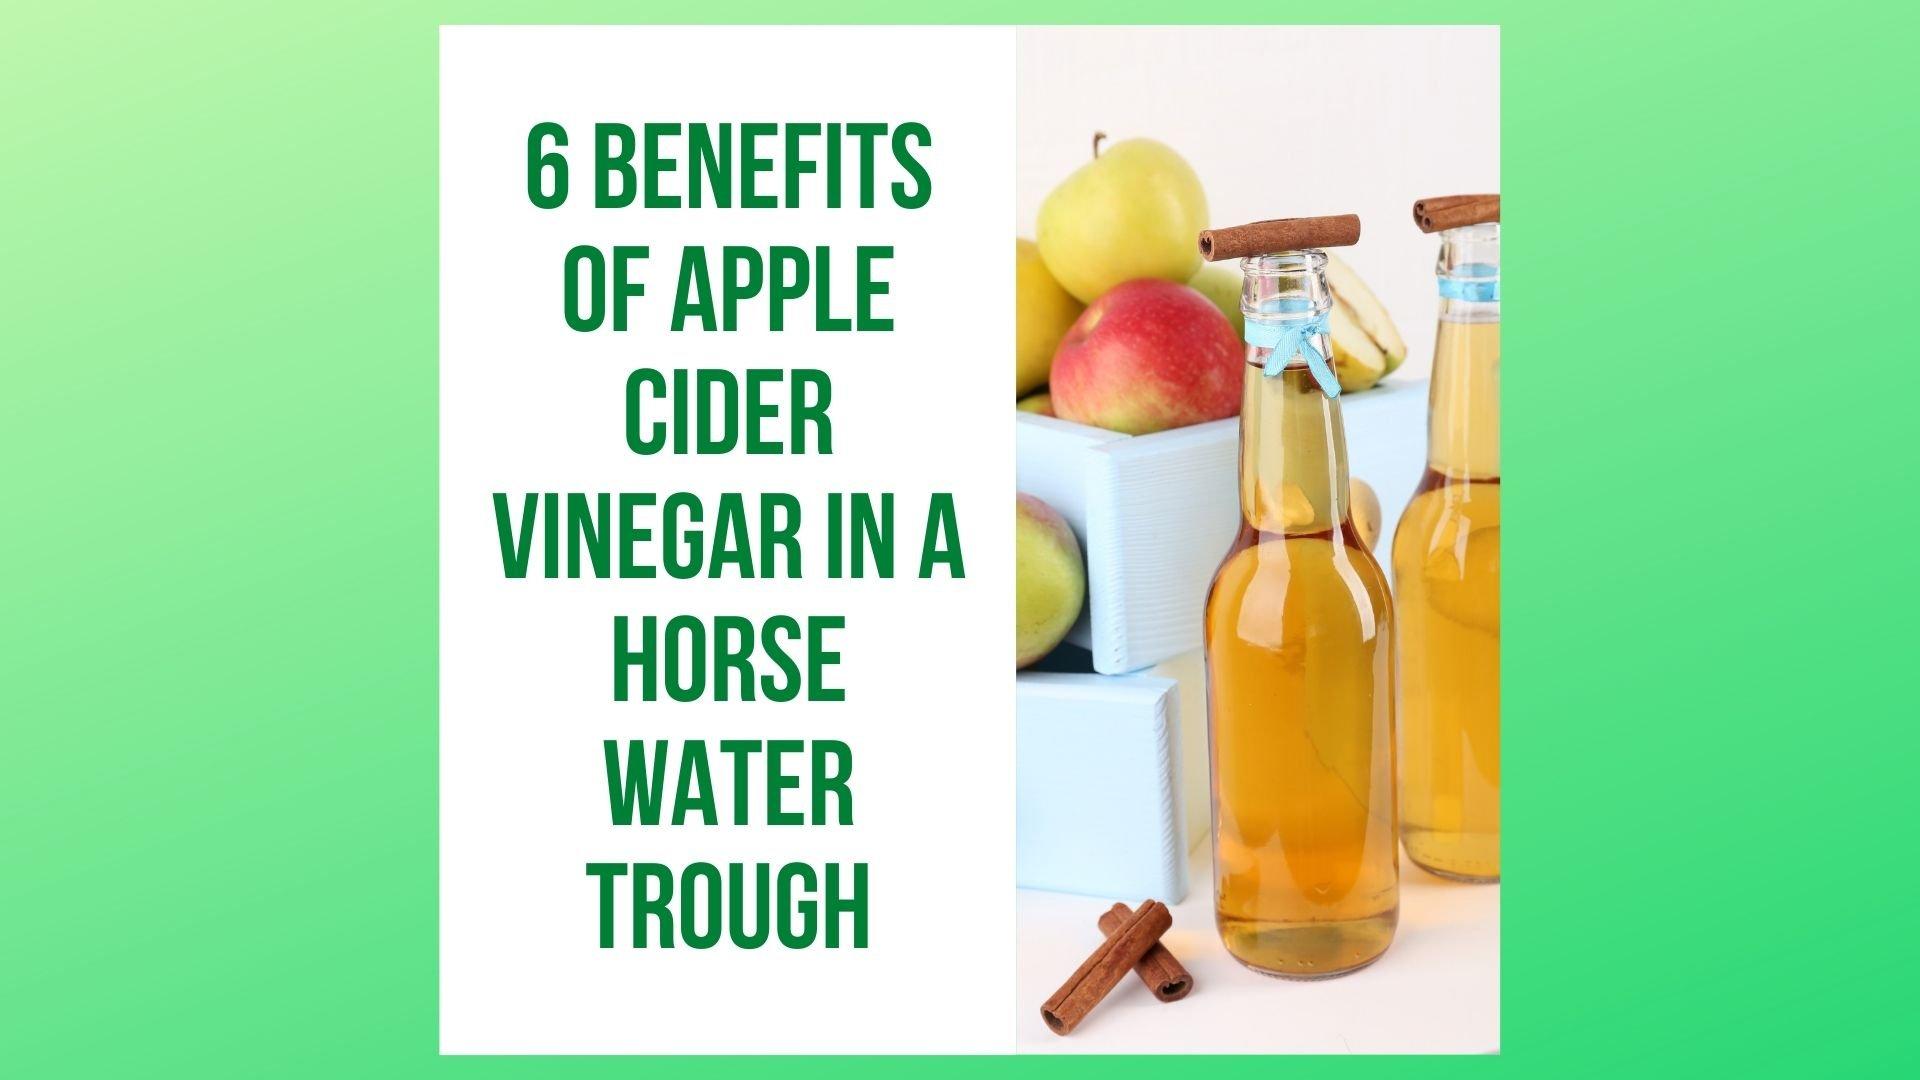 6 Benefits of Apple Cider Vinegar In A Horse Water Trough